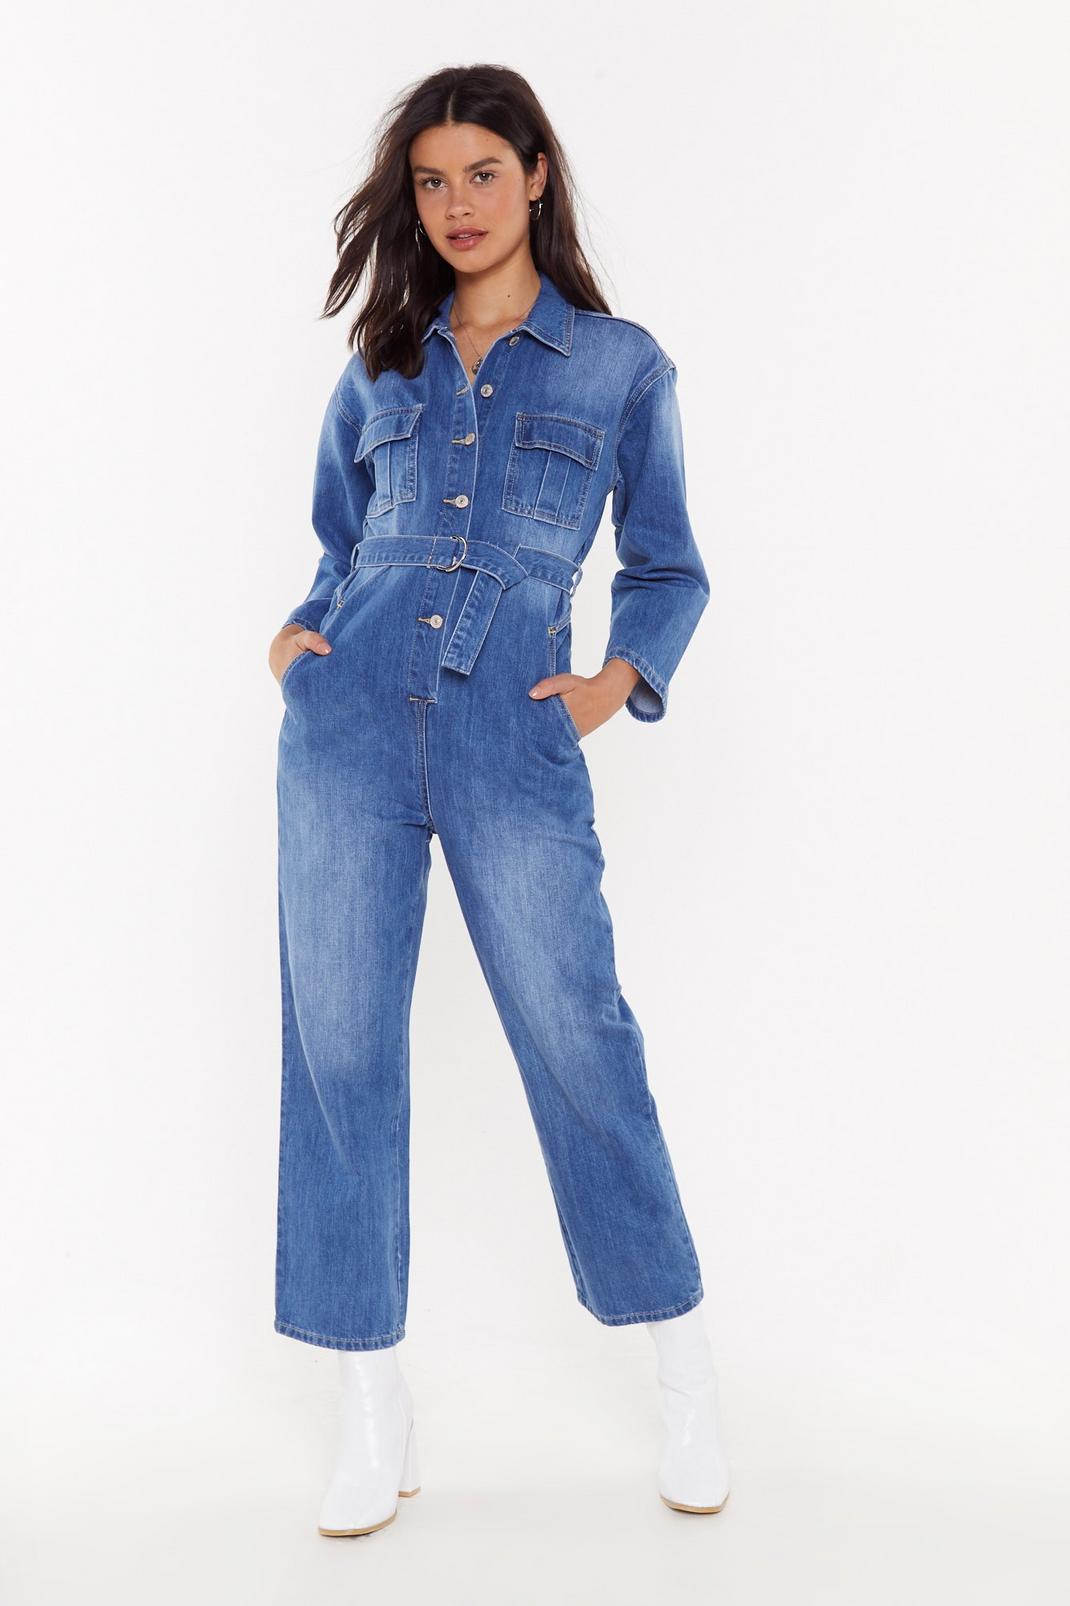 Jump to the Beat Denim Belted Jumpsuit